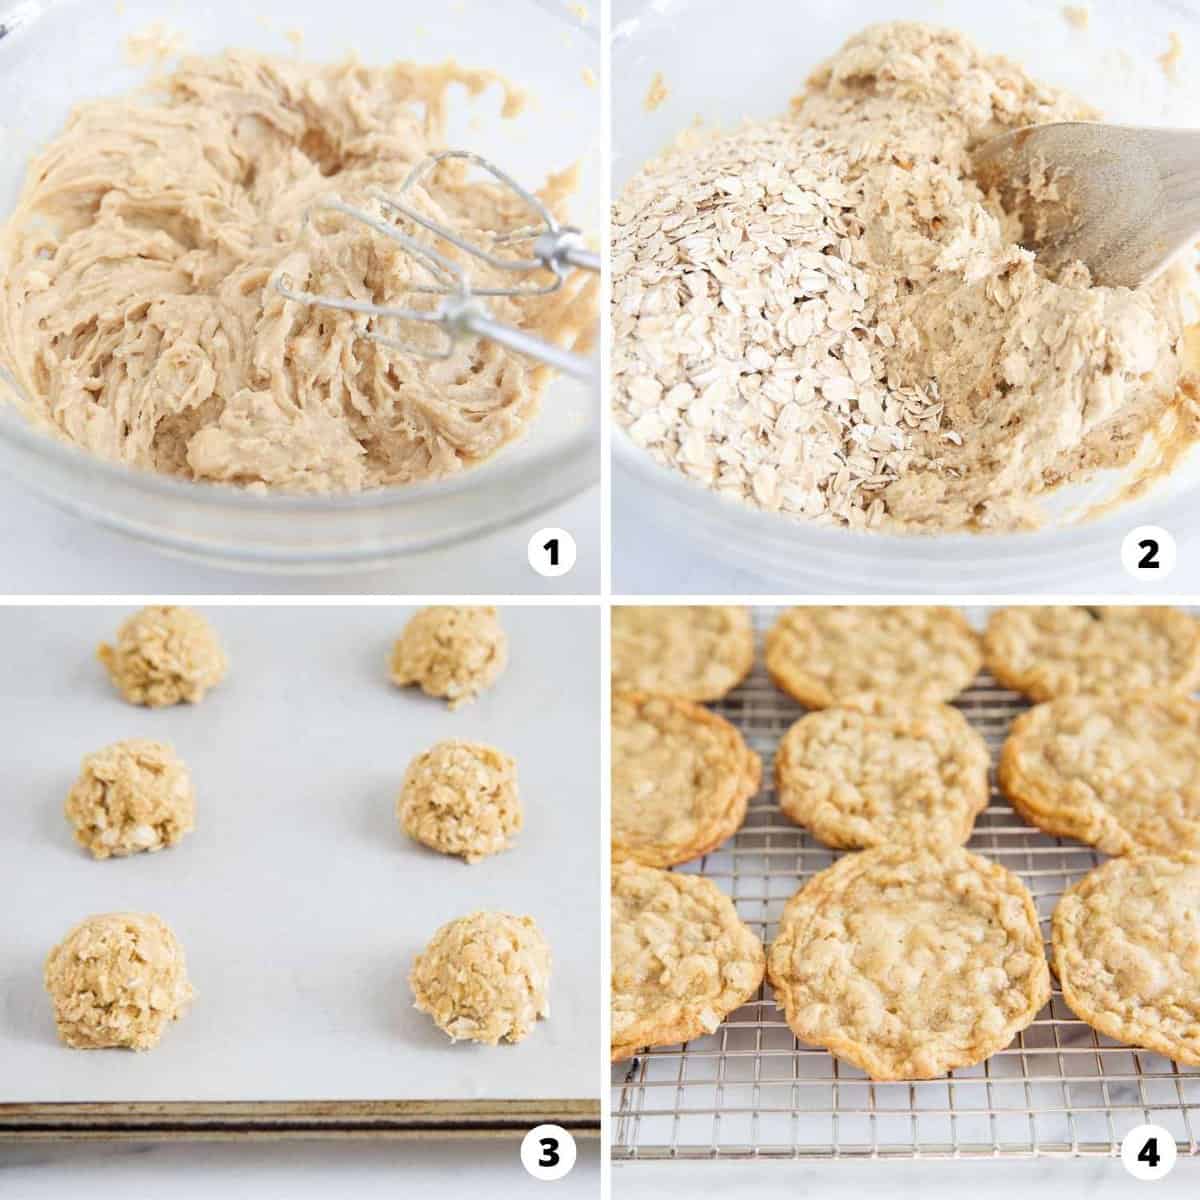 Showing how to make oatmeal cookies in a 4 step collage. 